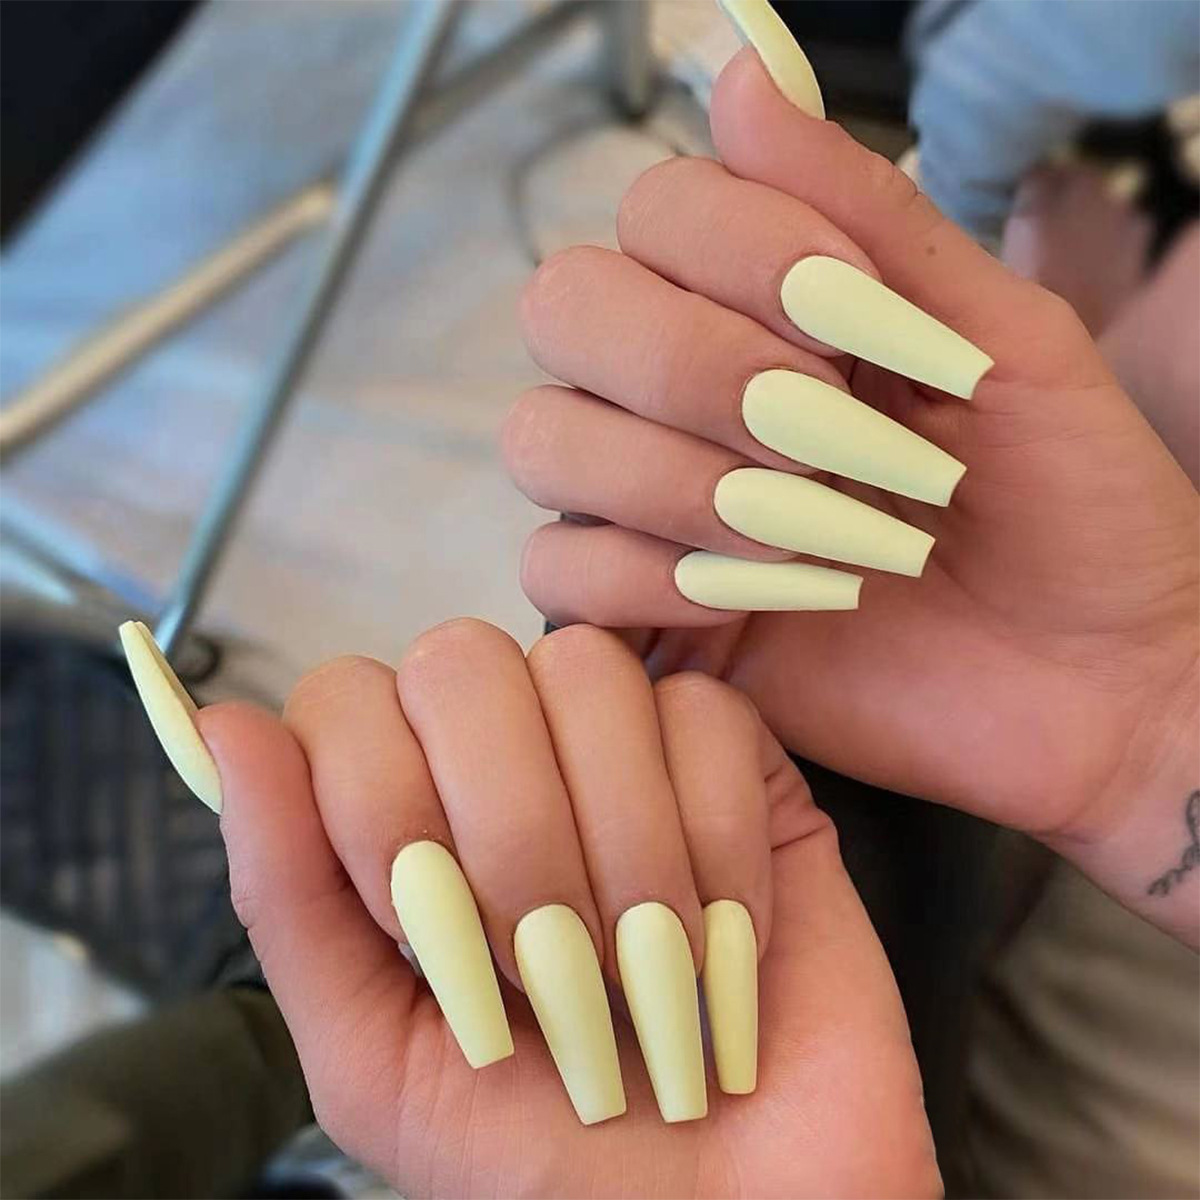 Ballerina nails 75+ Hottest Looking Nail Shapes for Women - 61